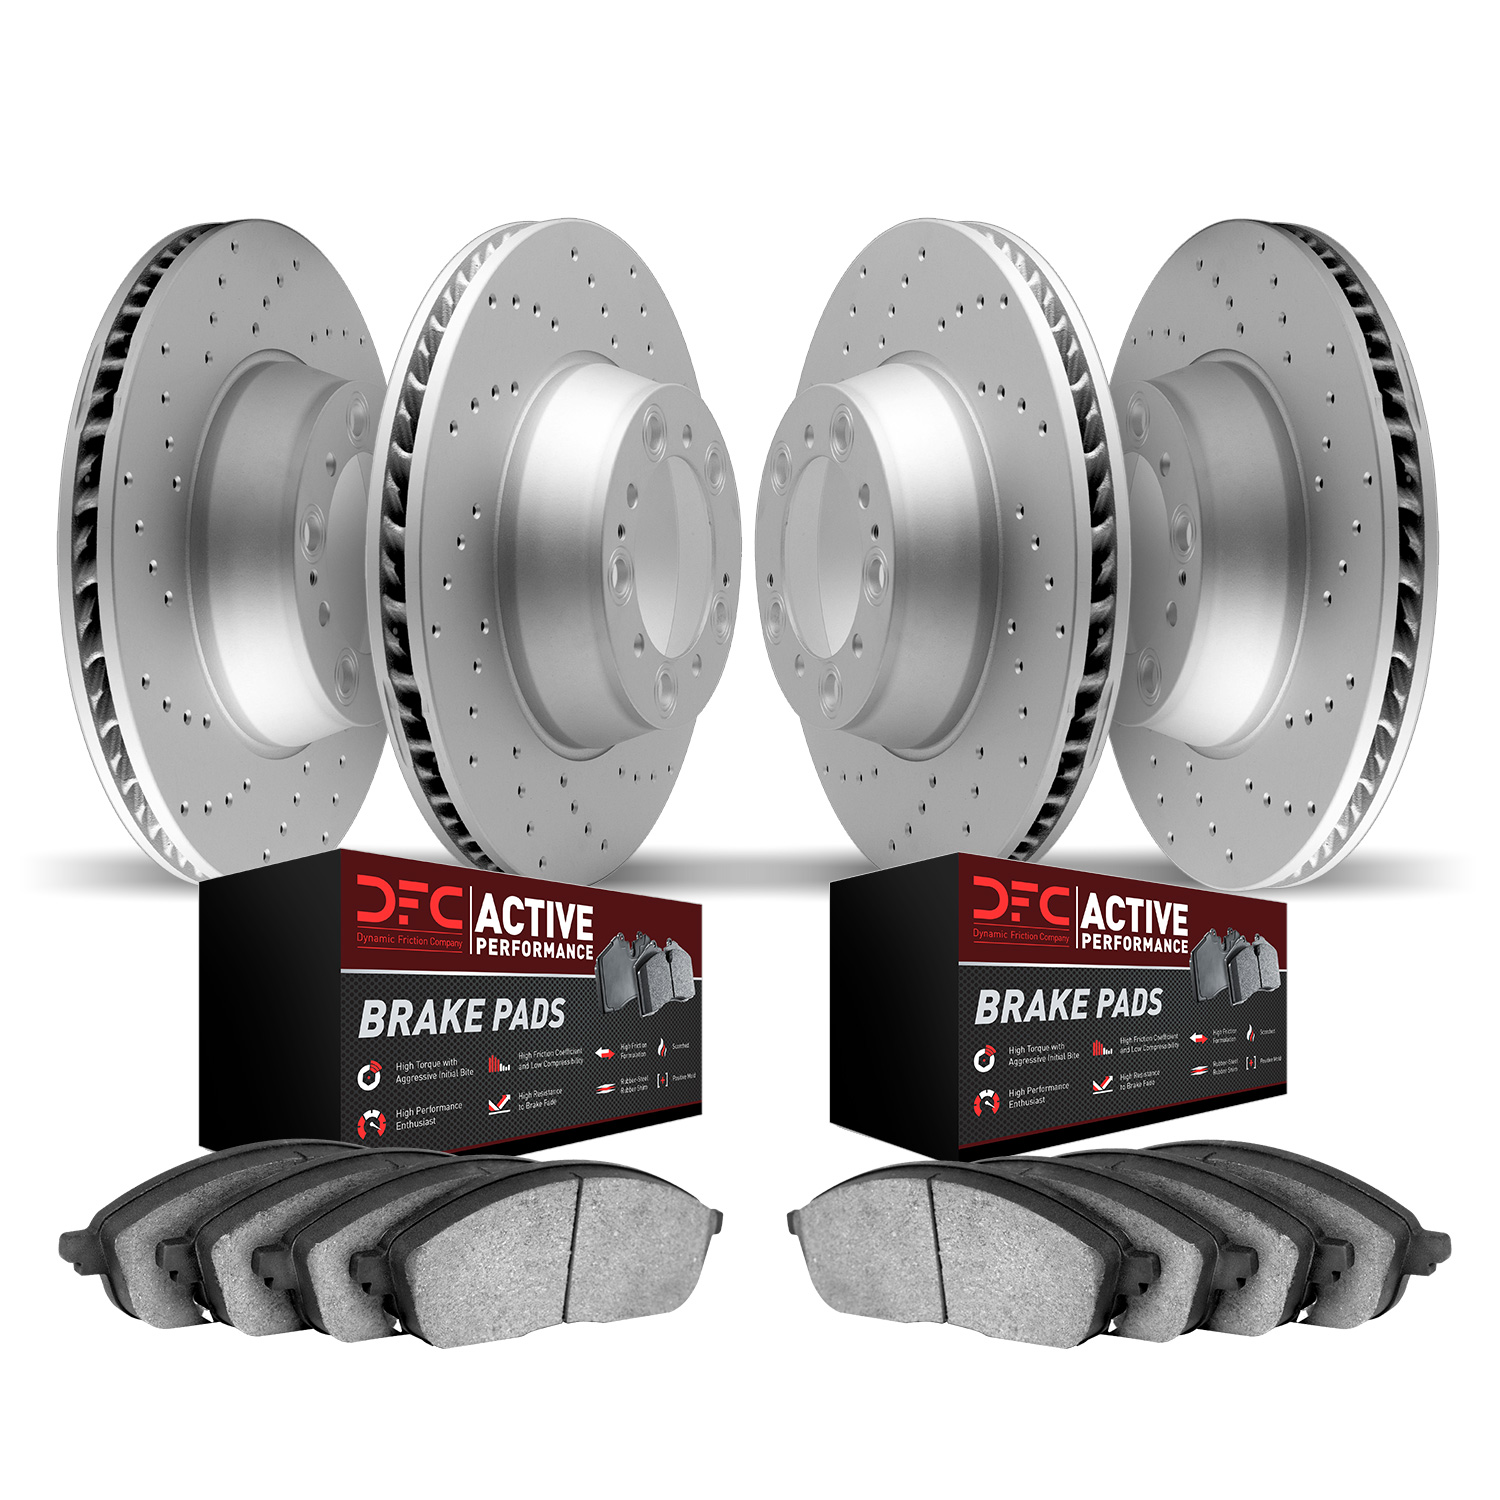 2704-46019 Geoperformance Drilled Brake Rotors with Active Performance Pads Kit, 2009-2015 GM, Position: Front and Rear